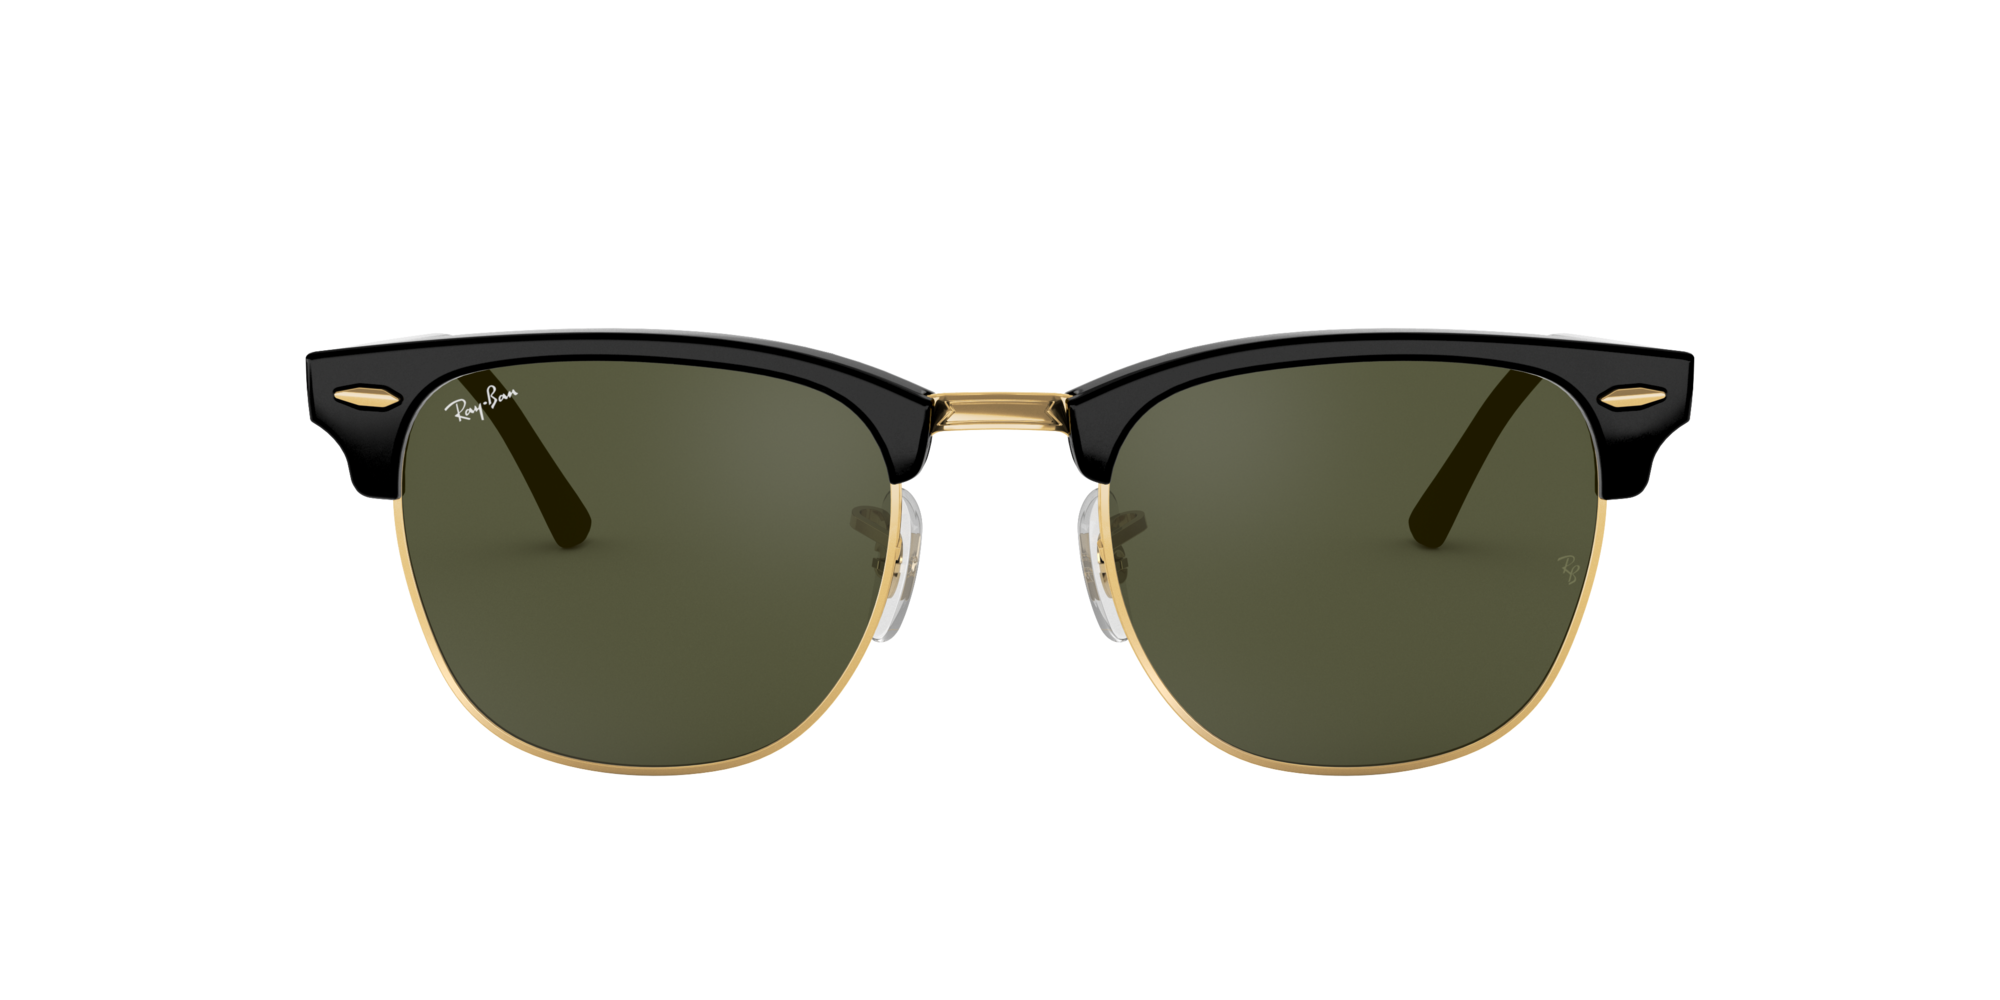 Ray-Ban 0RB3016 in Black Sunglasses | OPSM